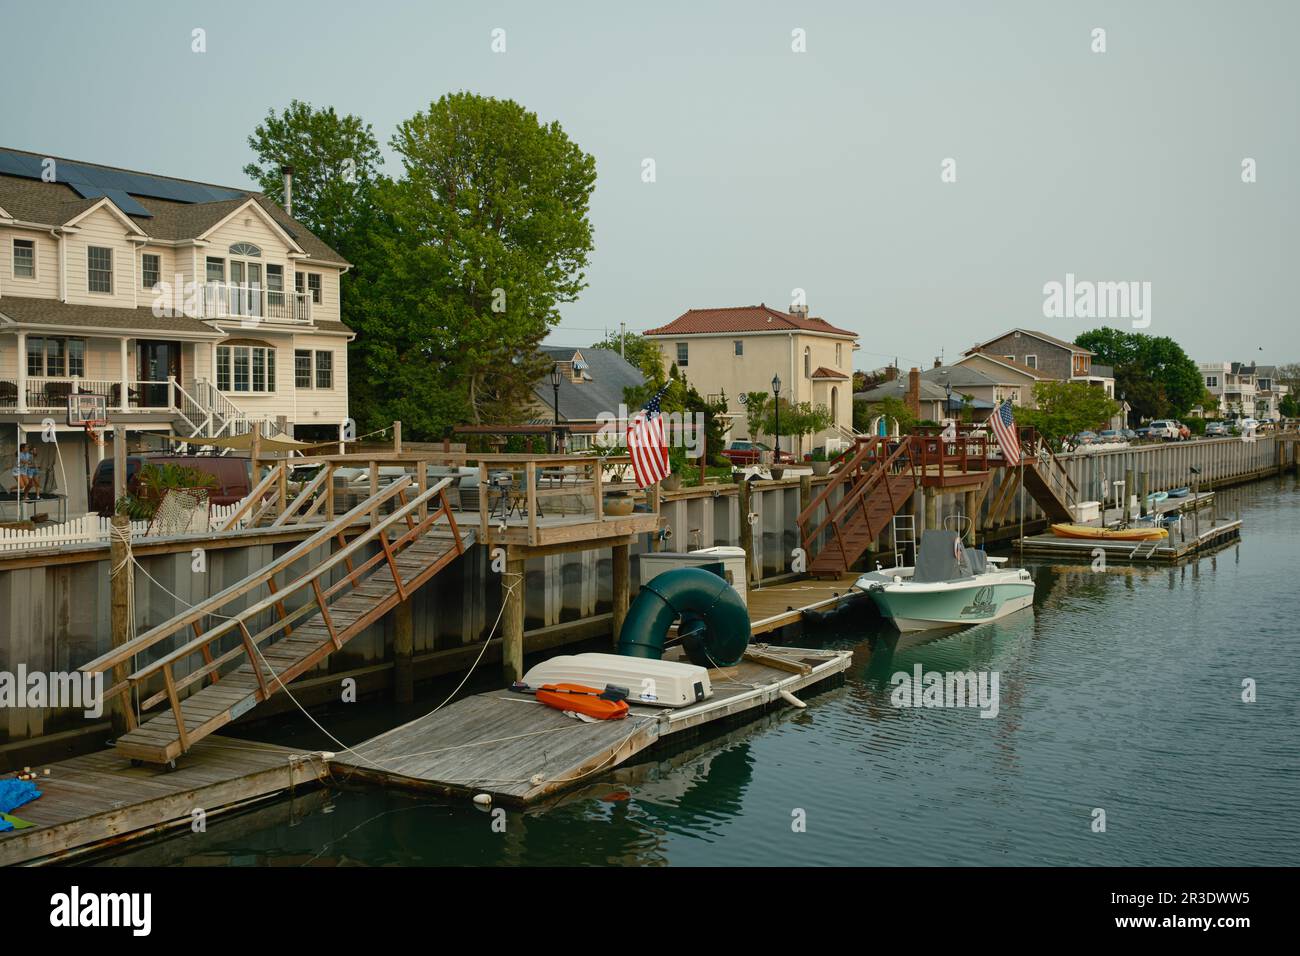 Canal with house and boats in Long Beach, New York Stock Photo